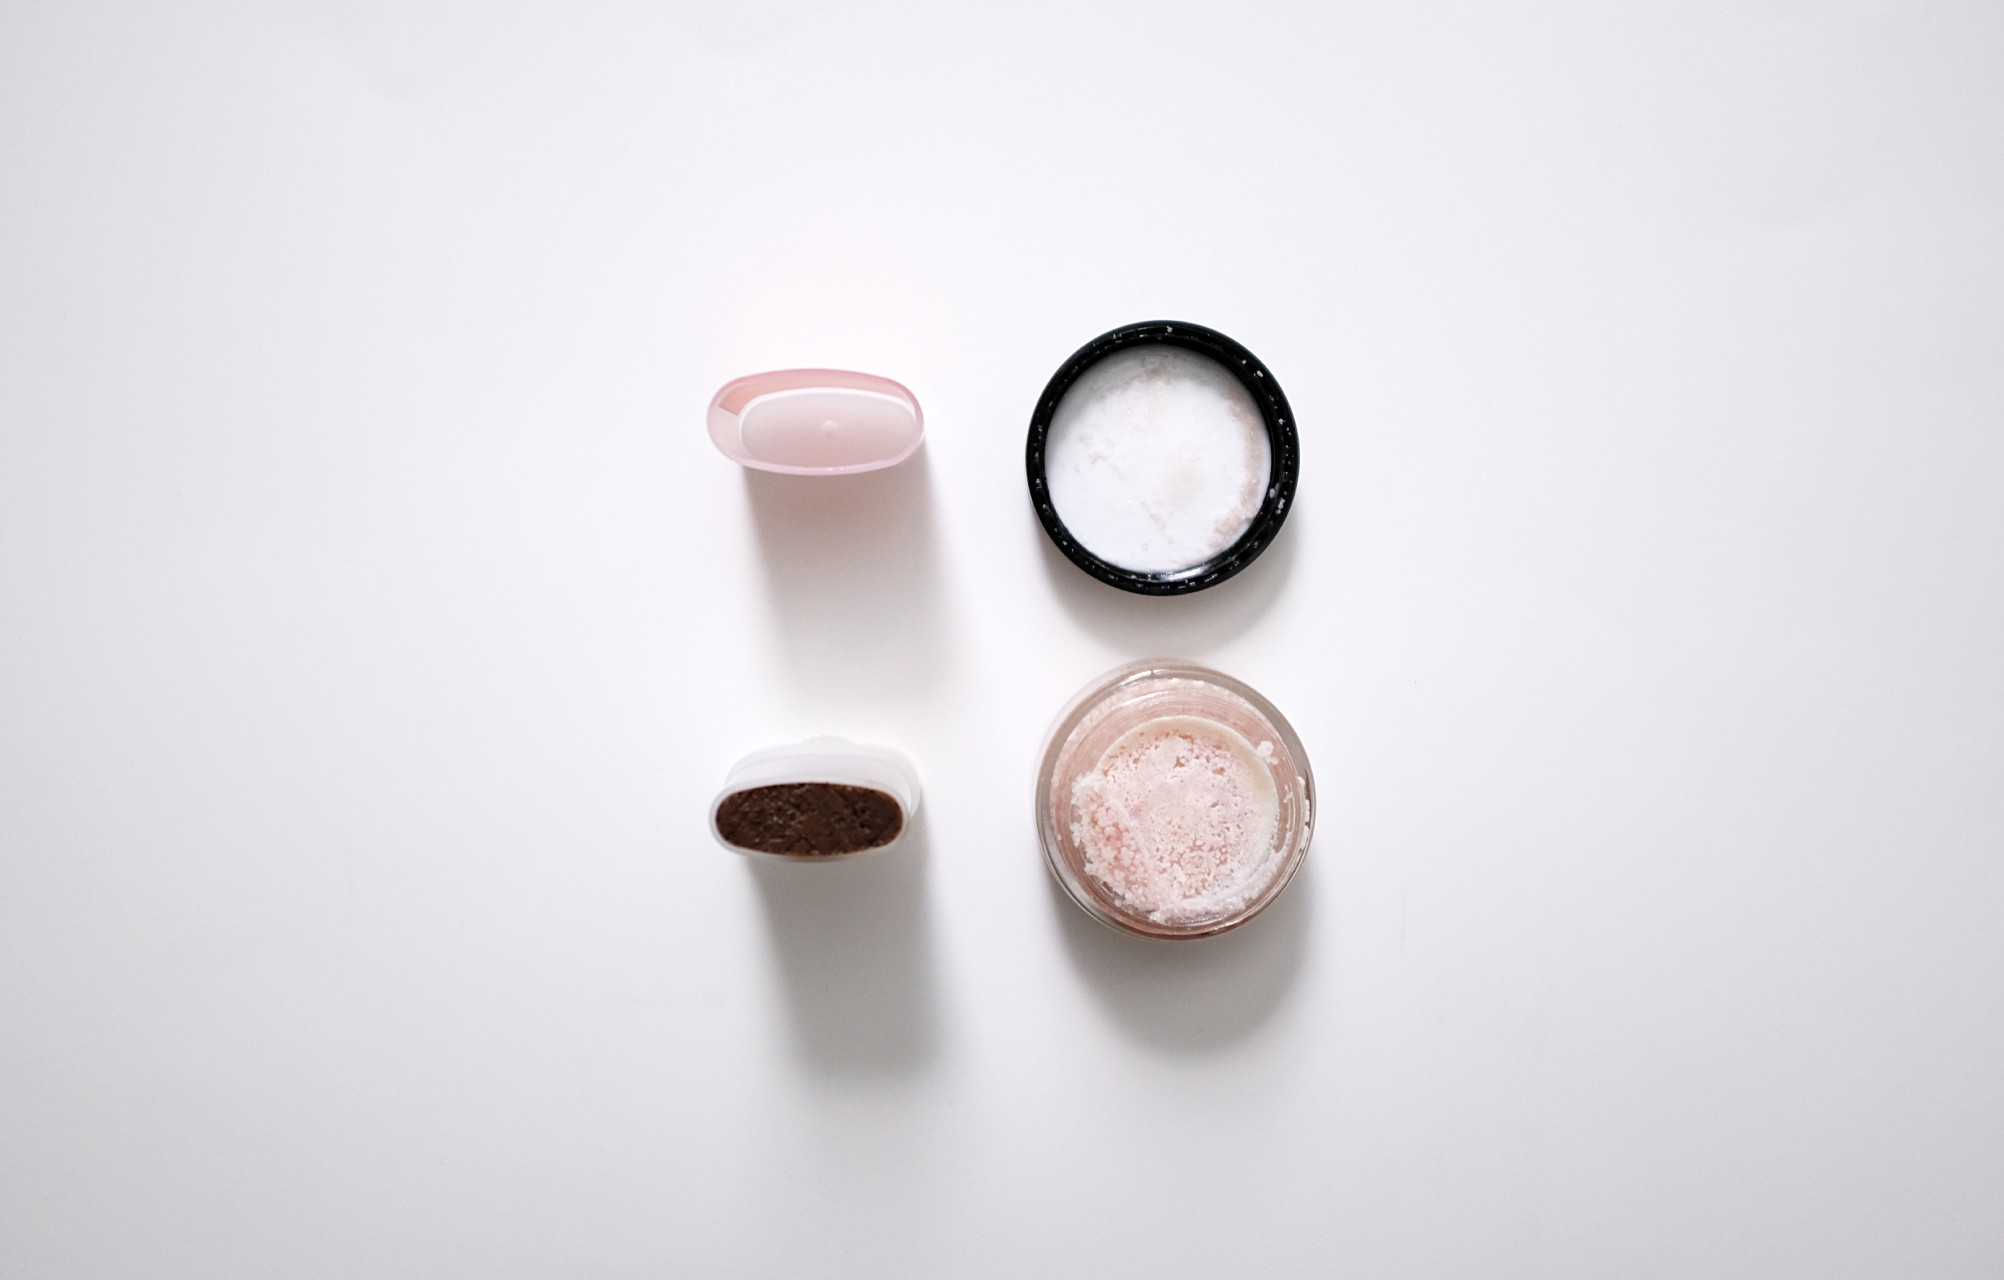 Two open beauty containers: on the left is the open tube of Olio E Osso Lip Scrub, and on the right is the FRENCH GIRL Lip Polish